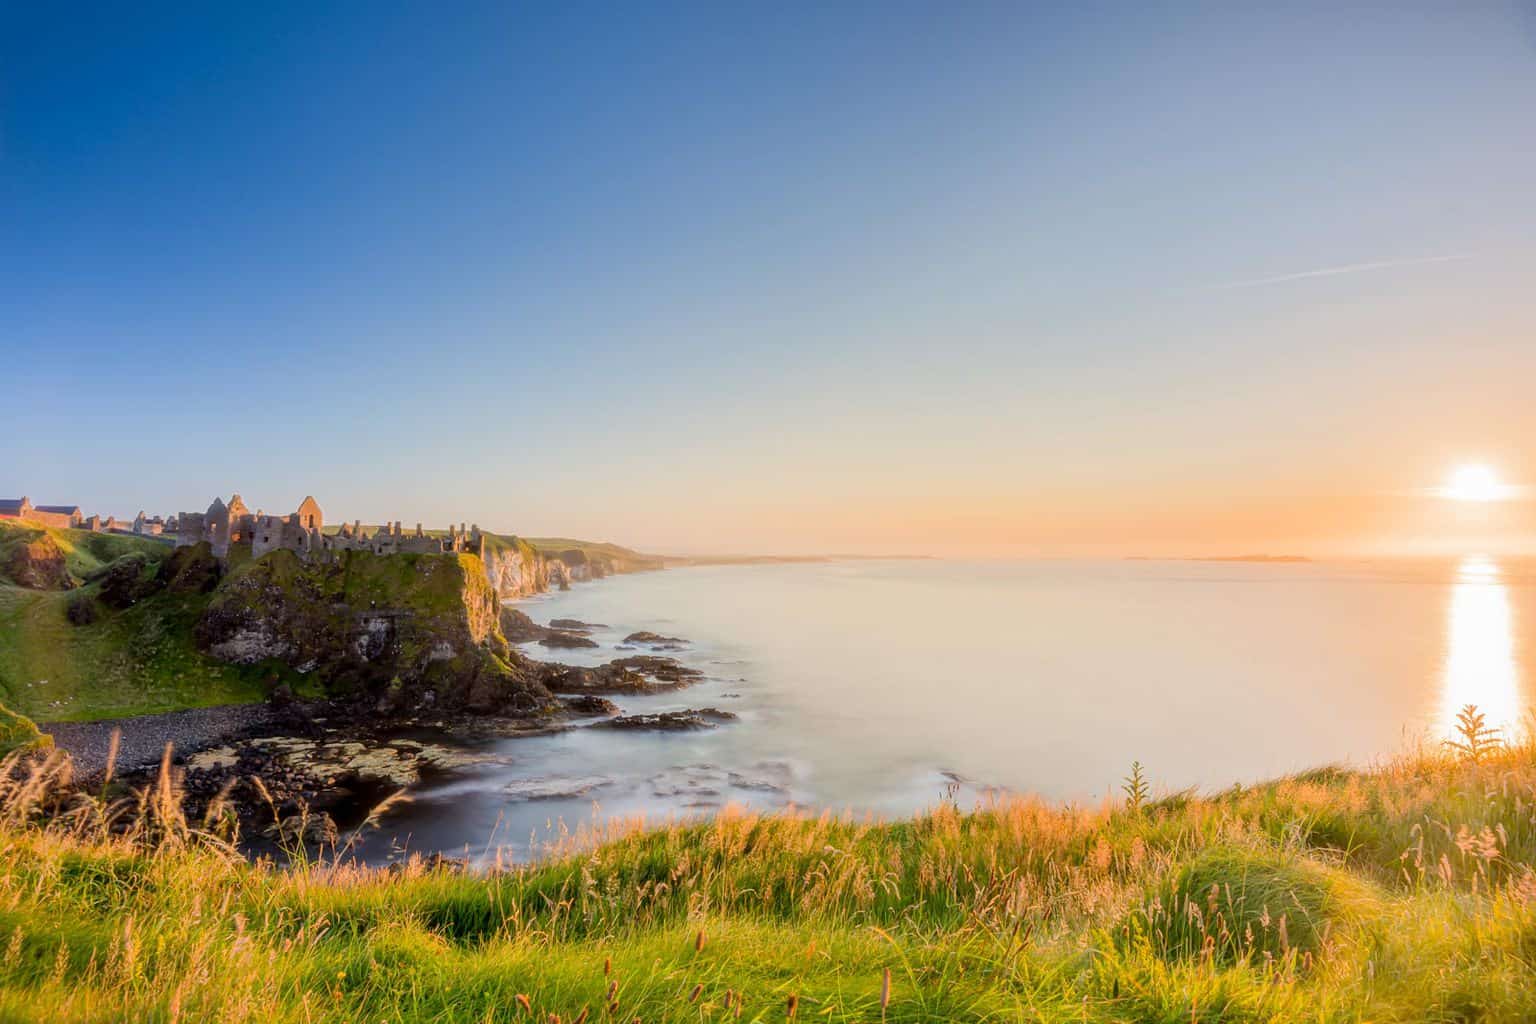 Sunset at Dunluce Castle in Co Antrim photograph taken by Kieran Hayes of Landscape Photography Ireland.